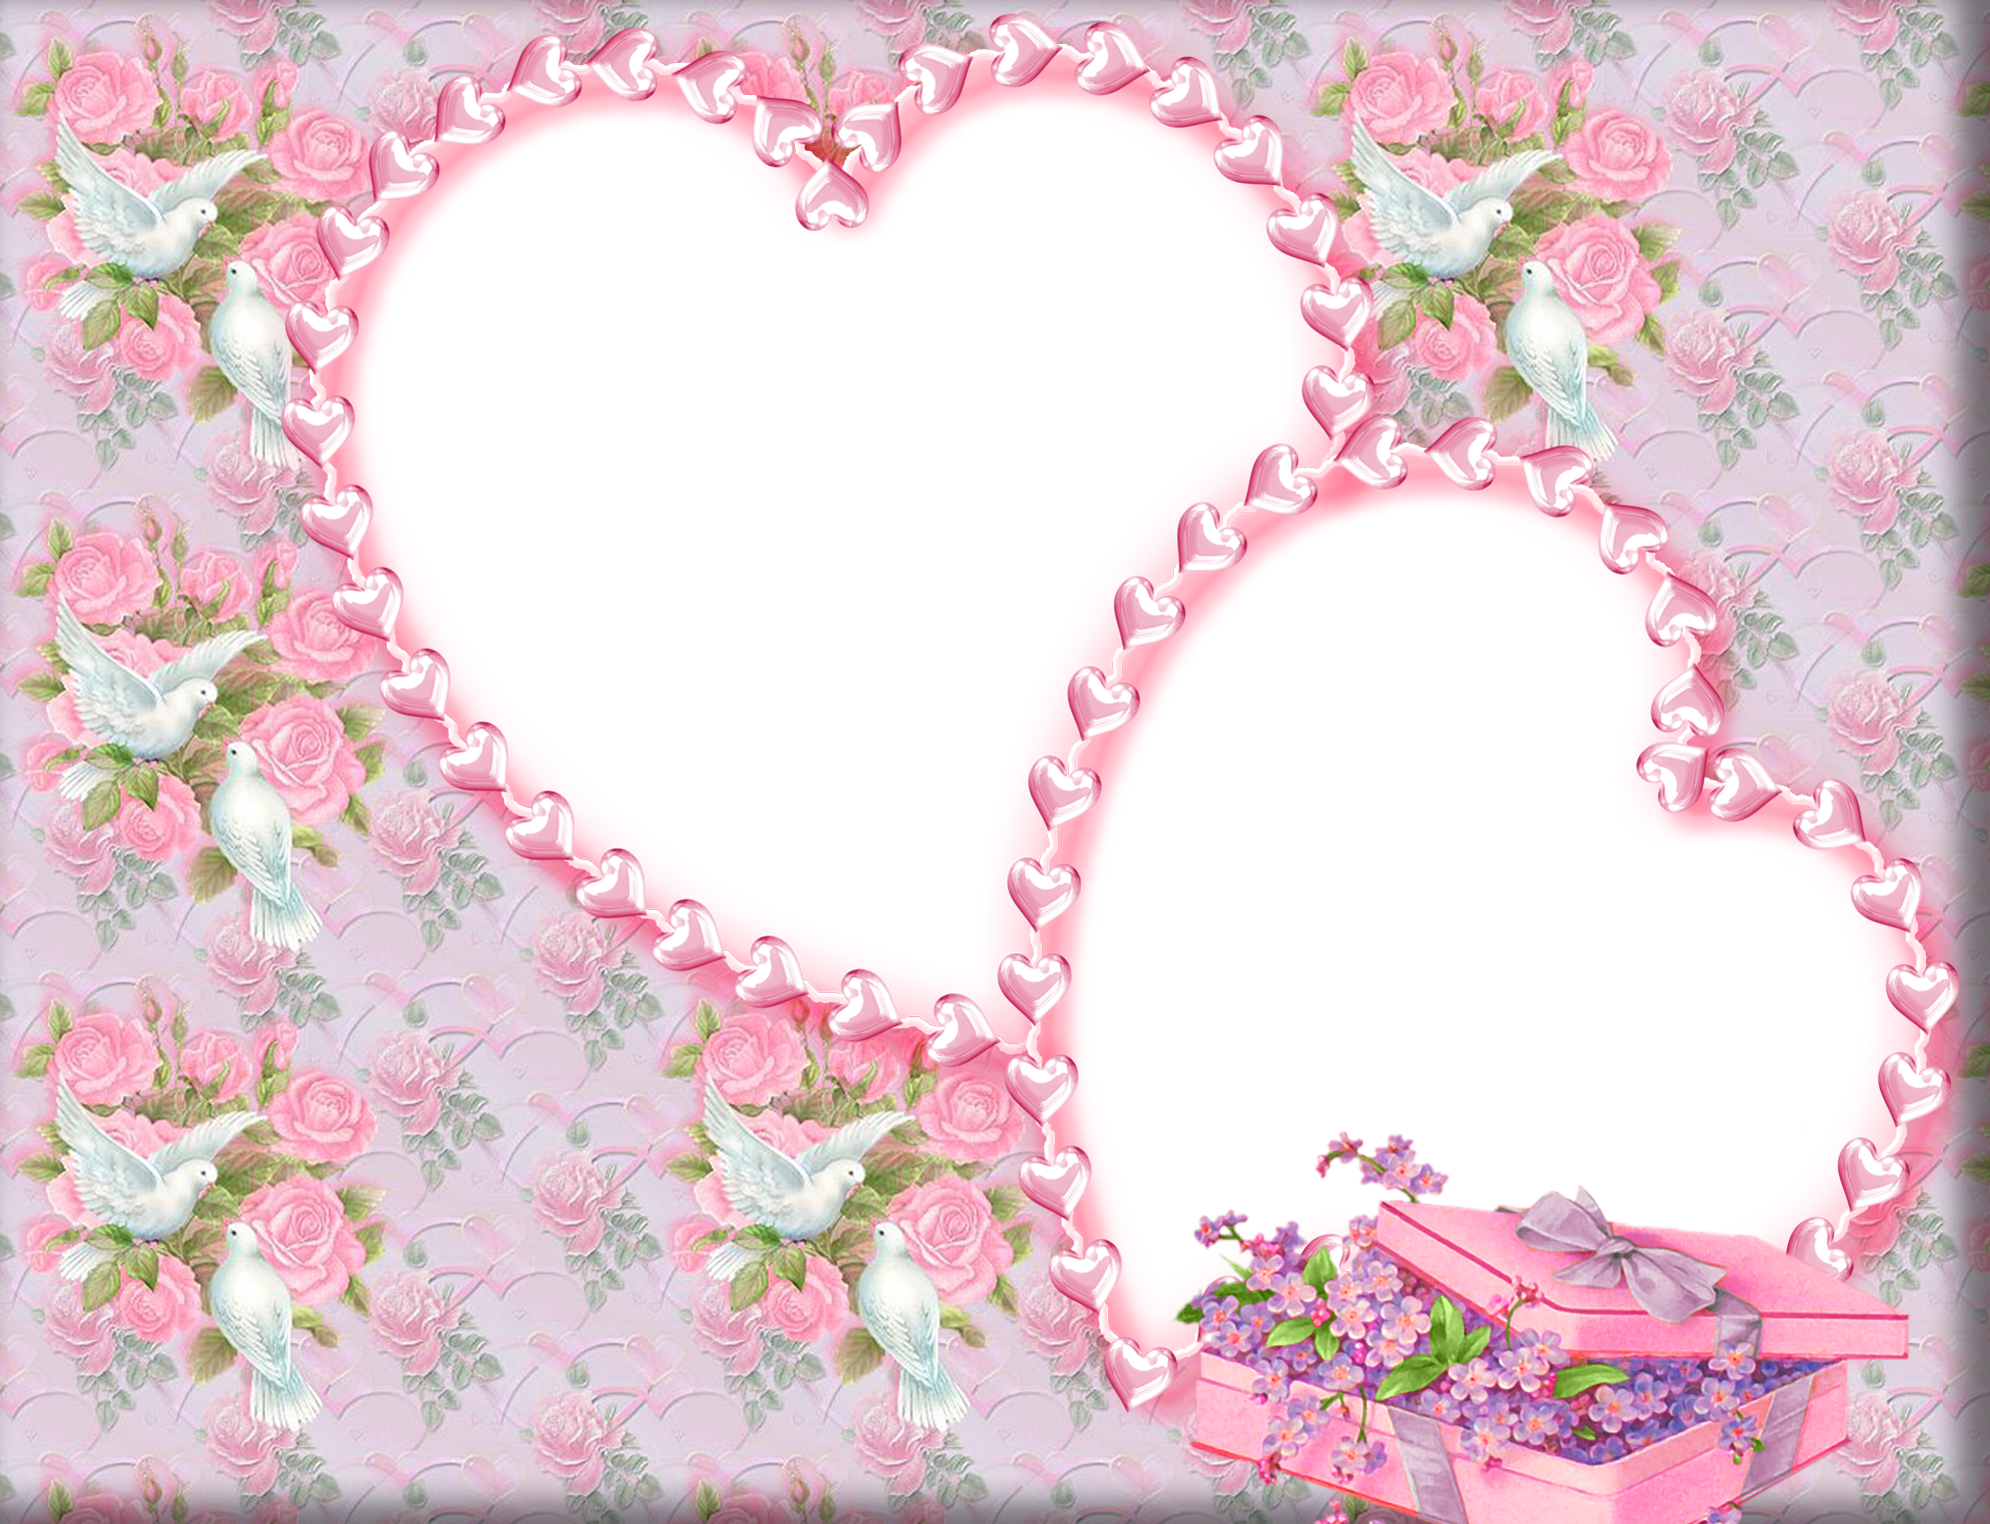 coral clipart frame